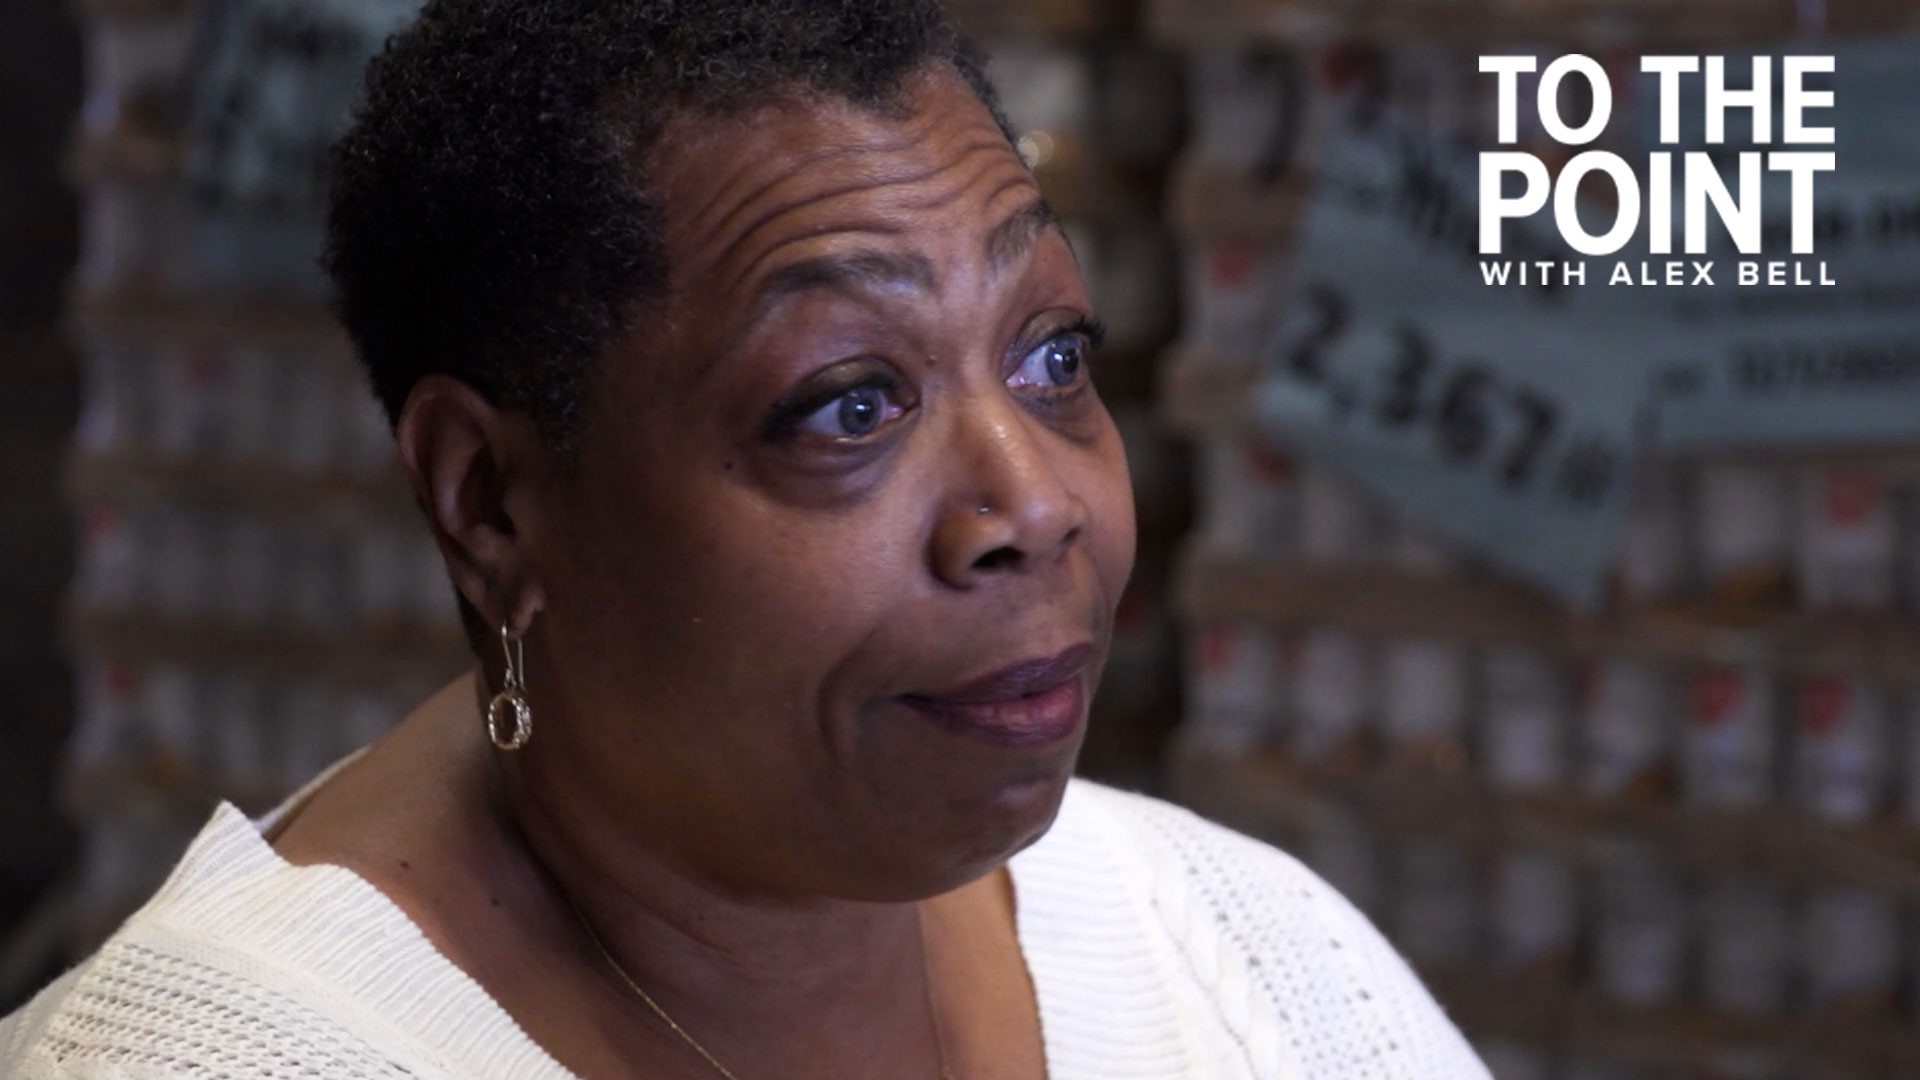 California woman shares her story of overcoming food insecurity | To The Point